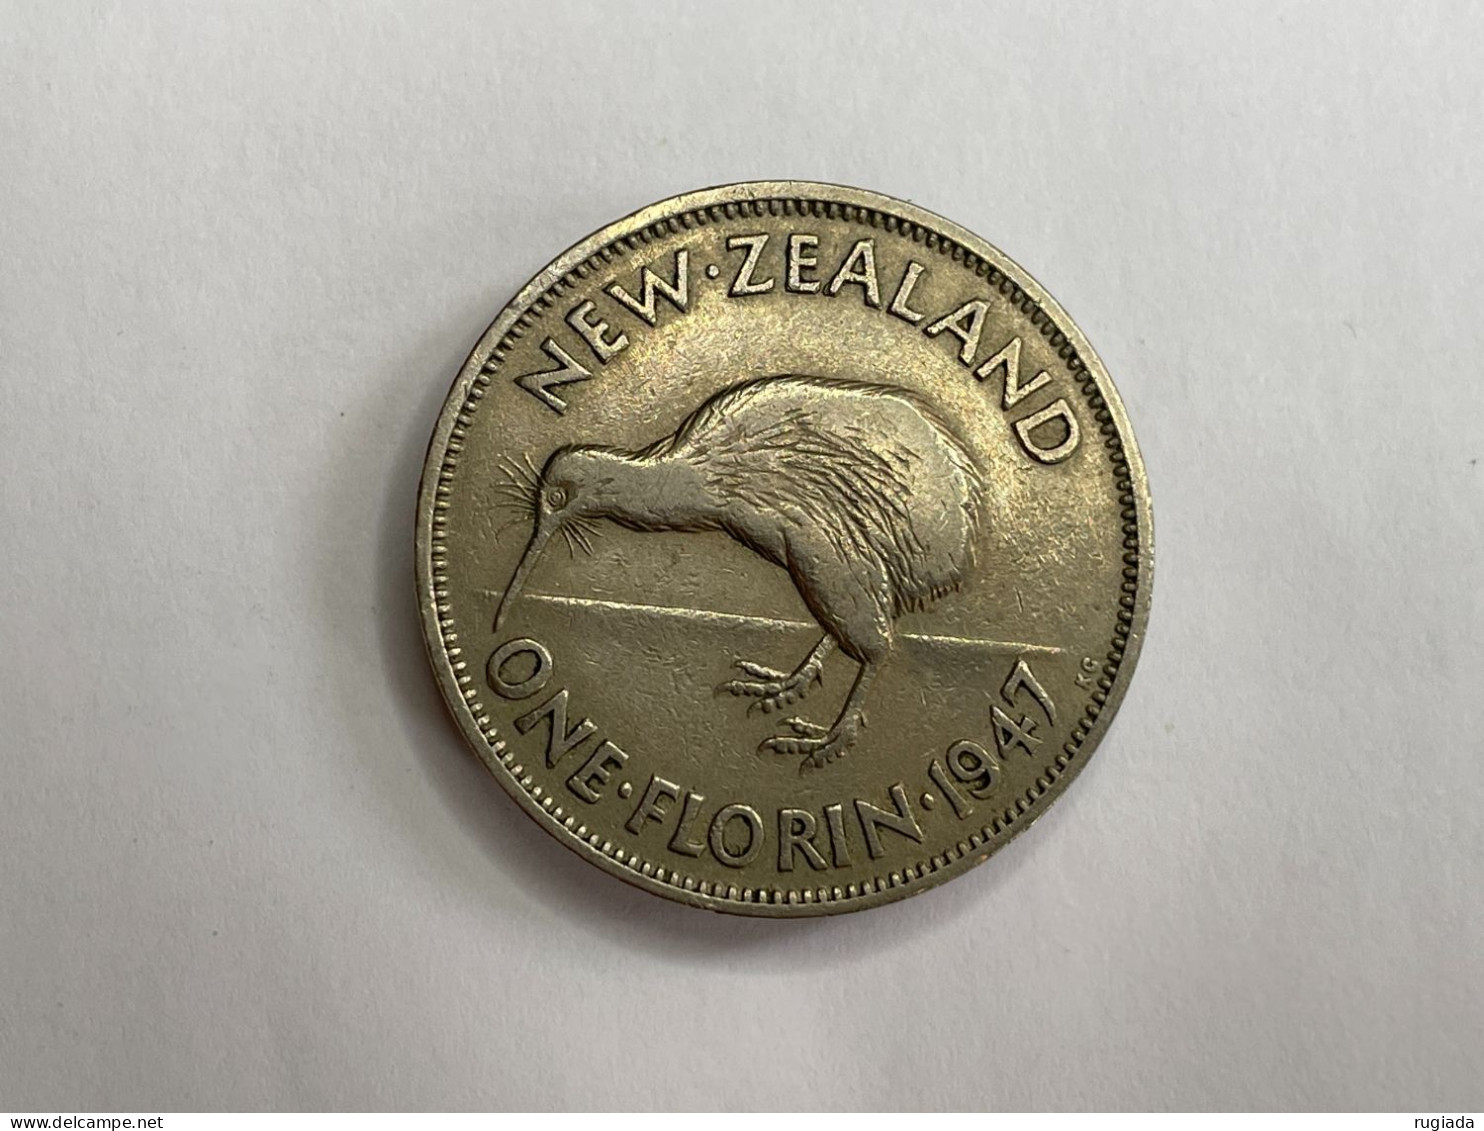 1947 New Zealand Florin/2 Shilling, Copper Nickel Coin, VF Very Fine - New Zealand